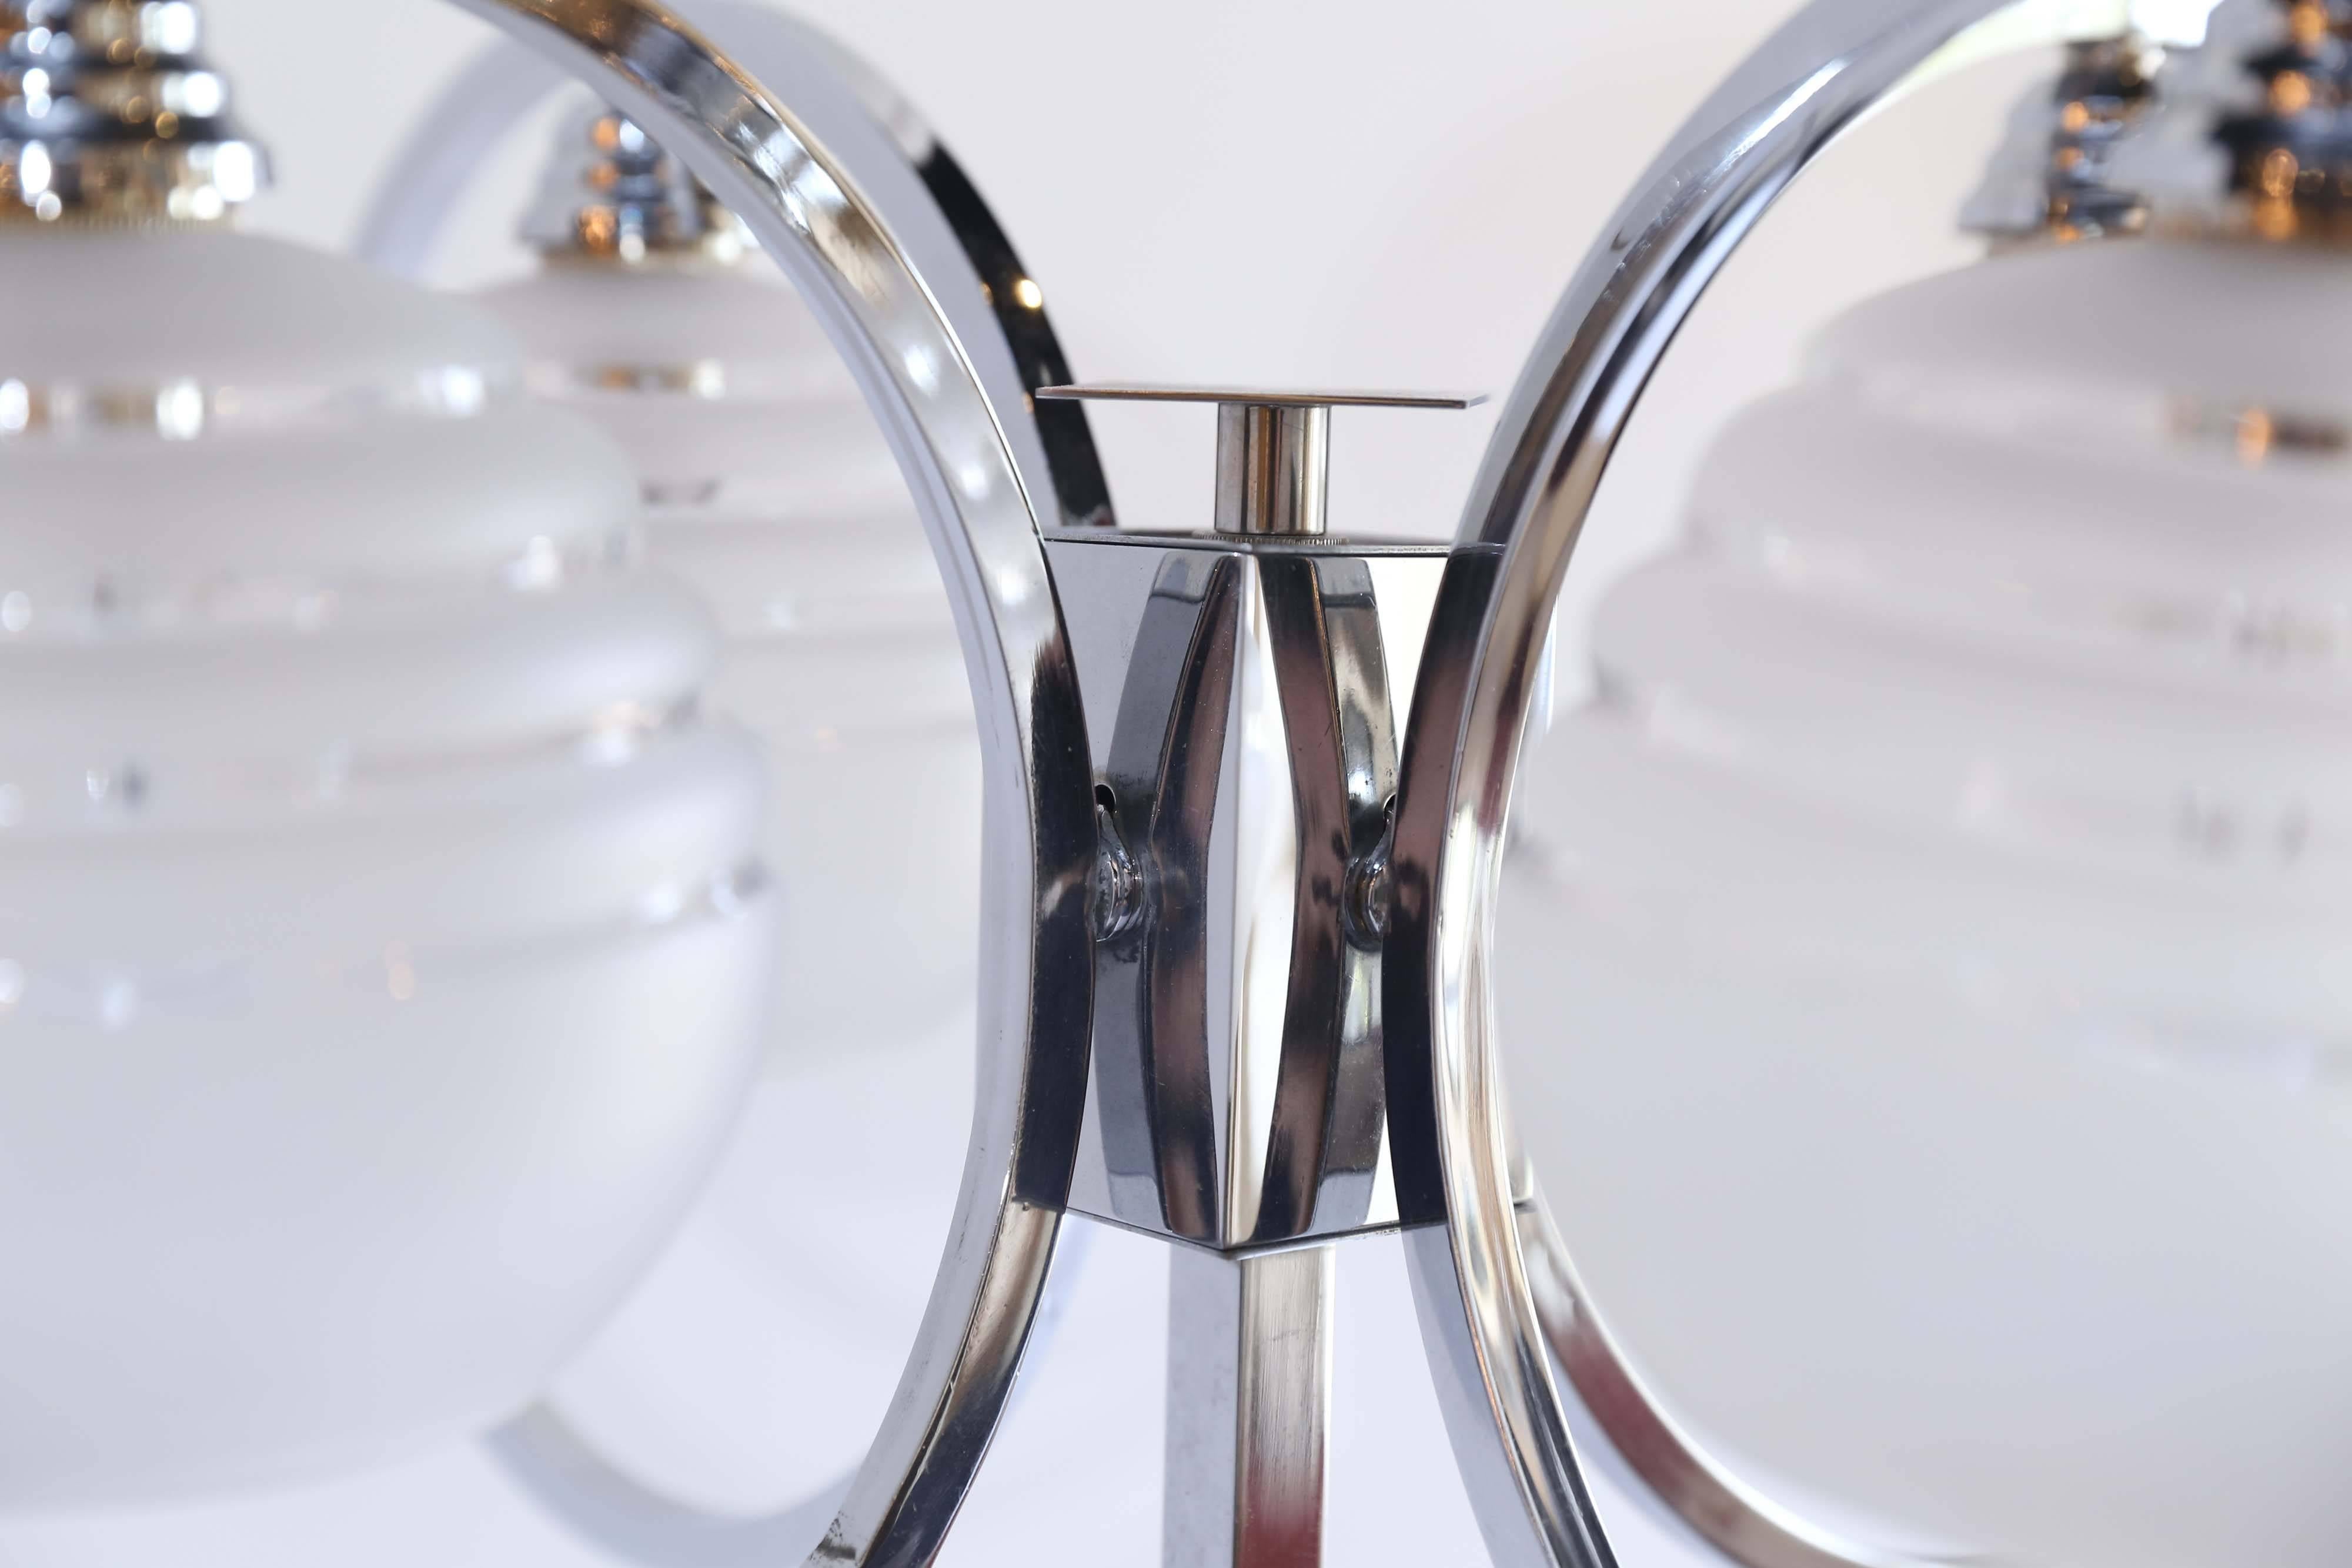 An up-purposed chrome four-light midcentury table lamp from France. Once a chandelier, the piece has been flipped and fitted onto an acrylic base. Four shaped globes of frosted glass with clear glass accents are suspended inside chrome circles.